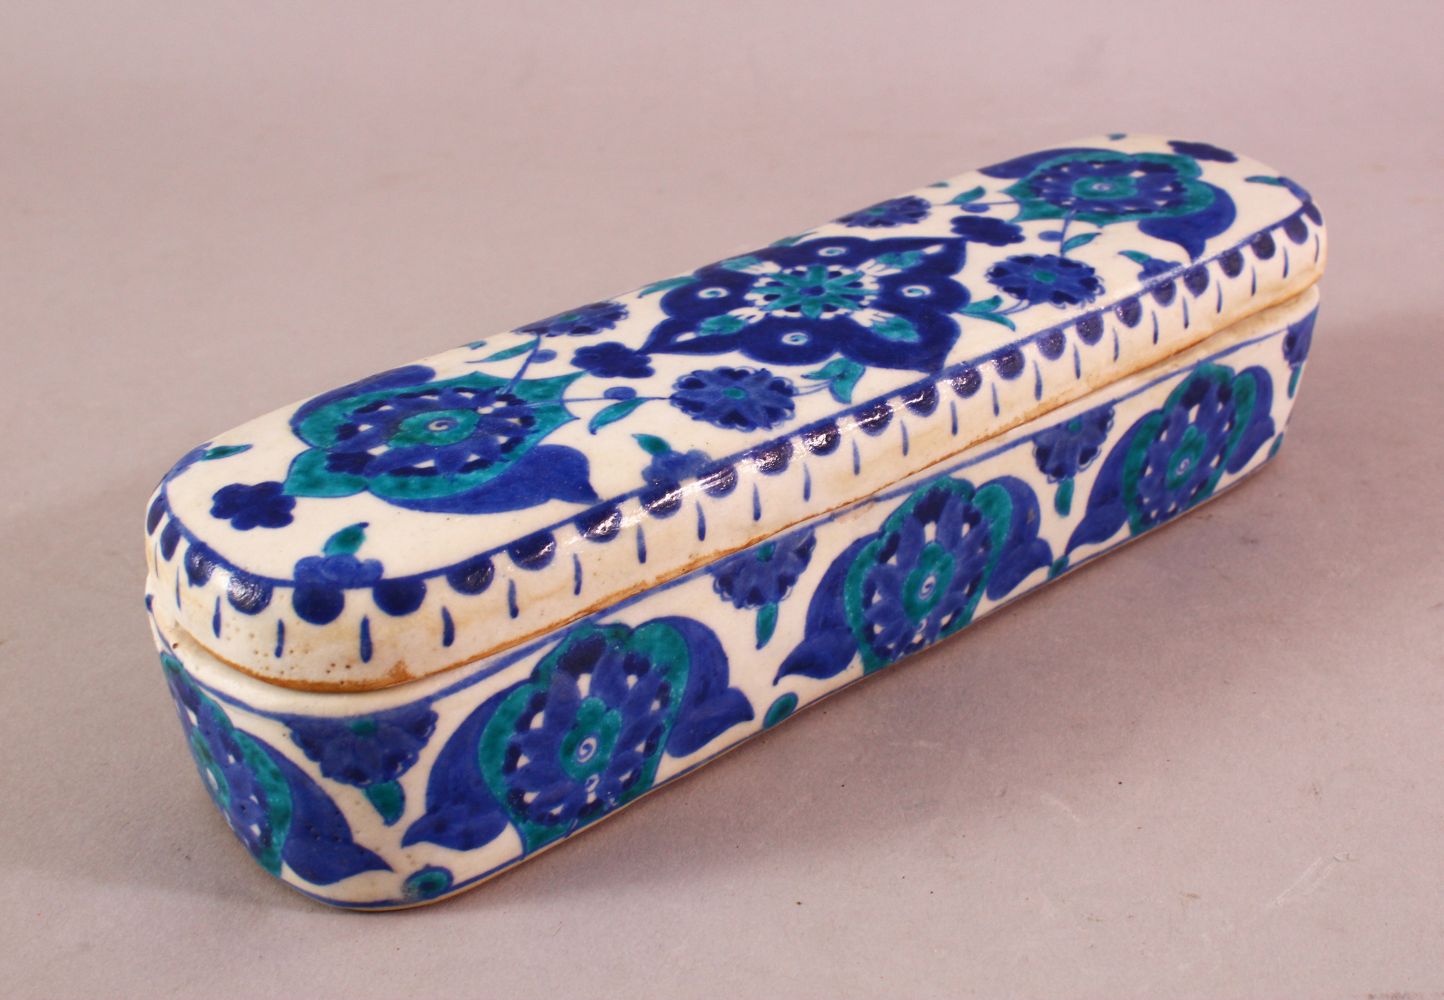 A TURKISH OTTOMAN KUTAHYA POTTERY PEN BOX & COVER, in blue and white floral decoration, 23cm